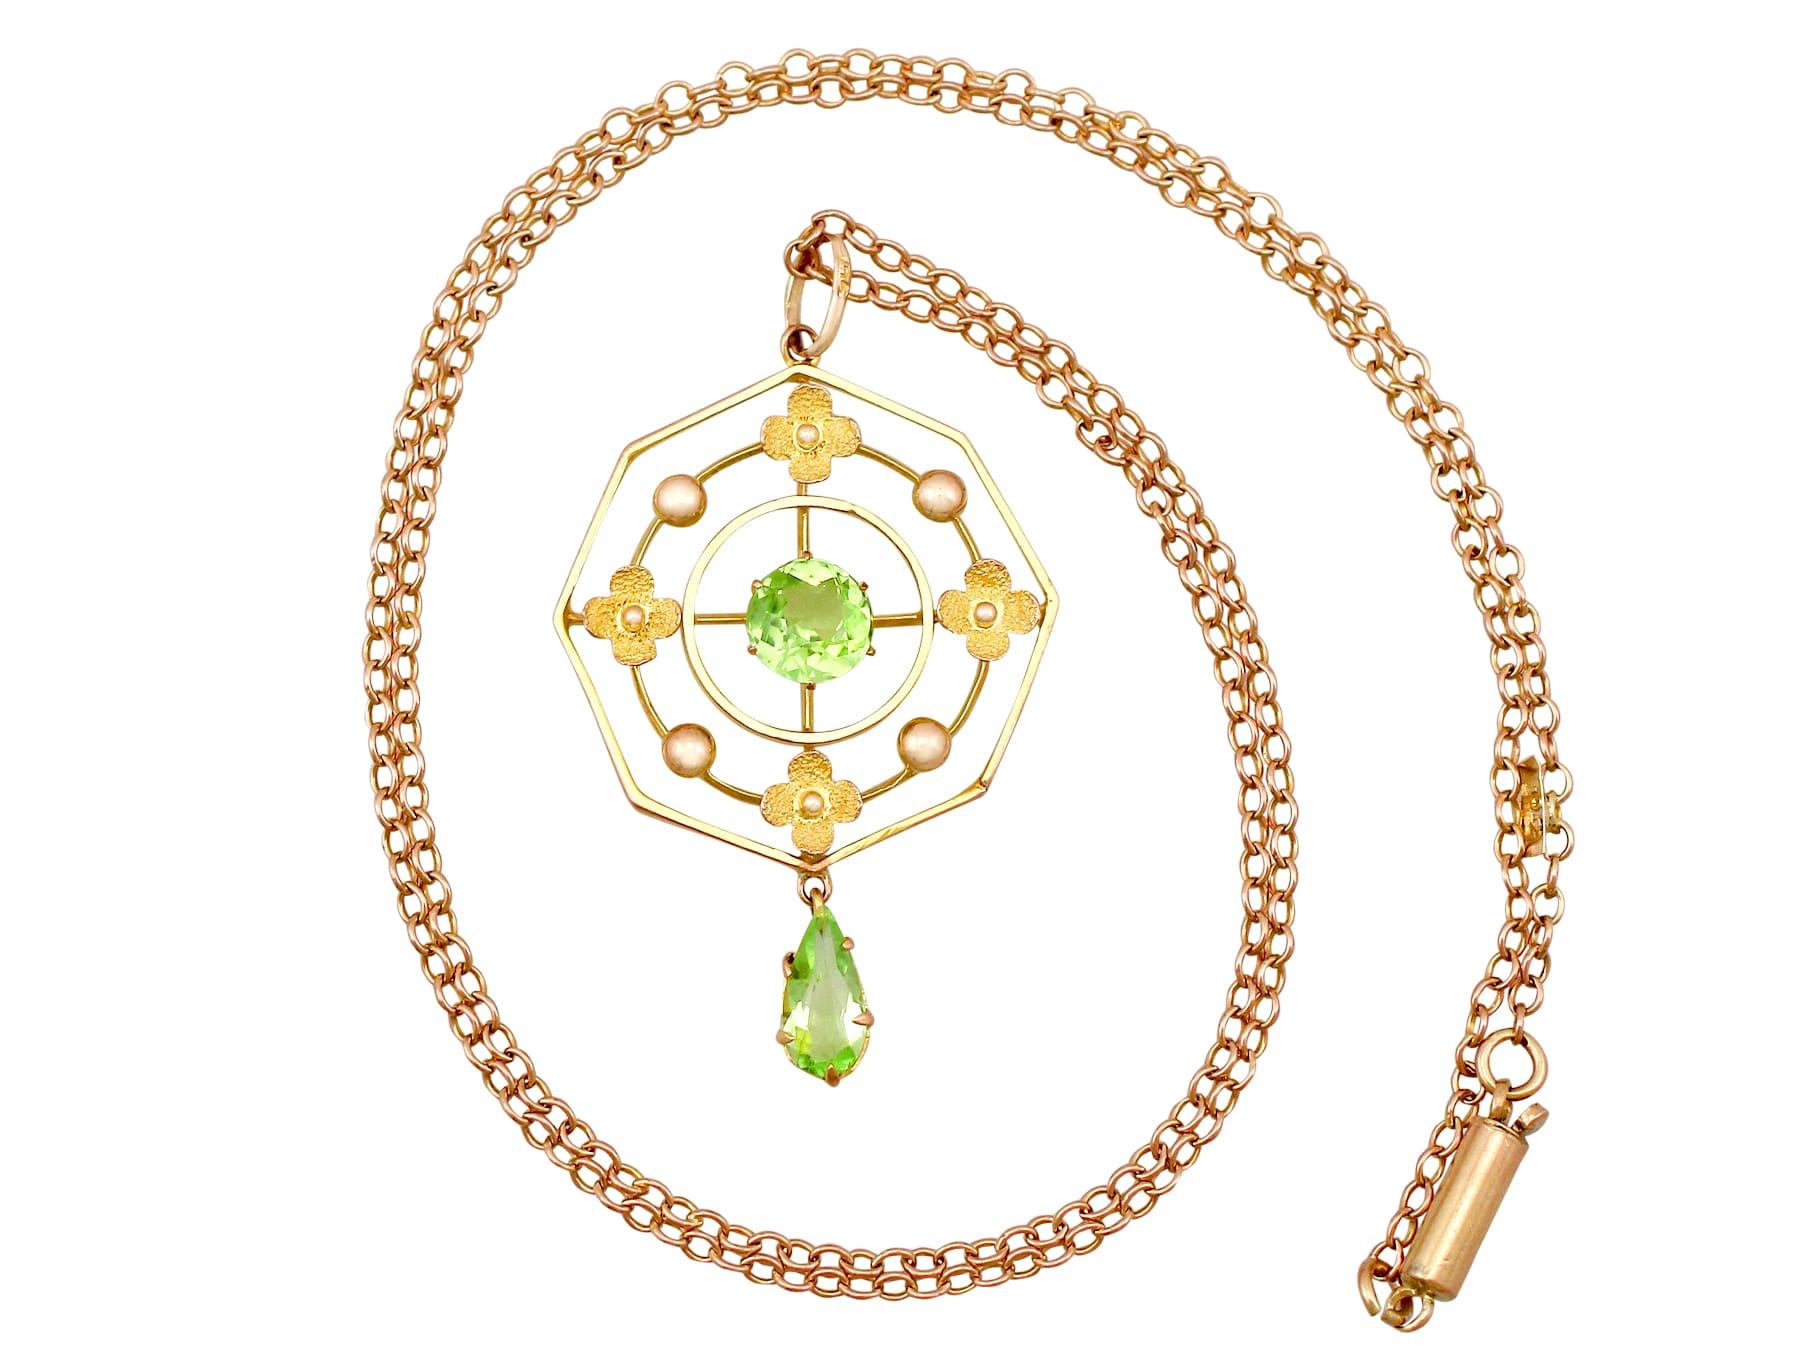 An impressive antique 1930s 1.15 carat peridot and 9 karat yellow gold pendant and chain; part of our diverse antique jewelry and estate jewelry collections.

This fine and impressive antique peridot pendant has been crafted in 9k yellow gold.

The